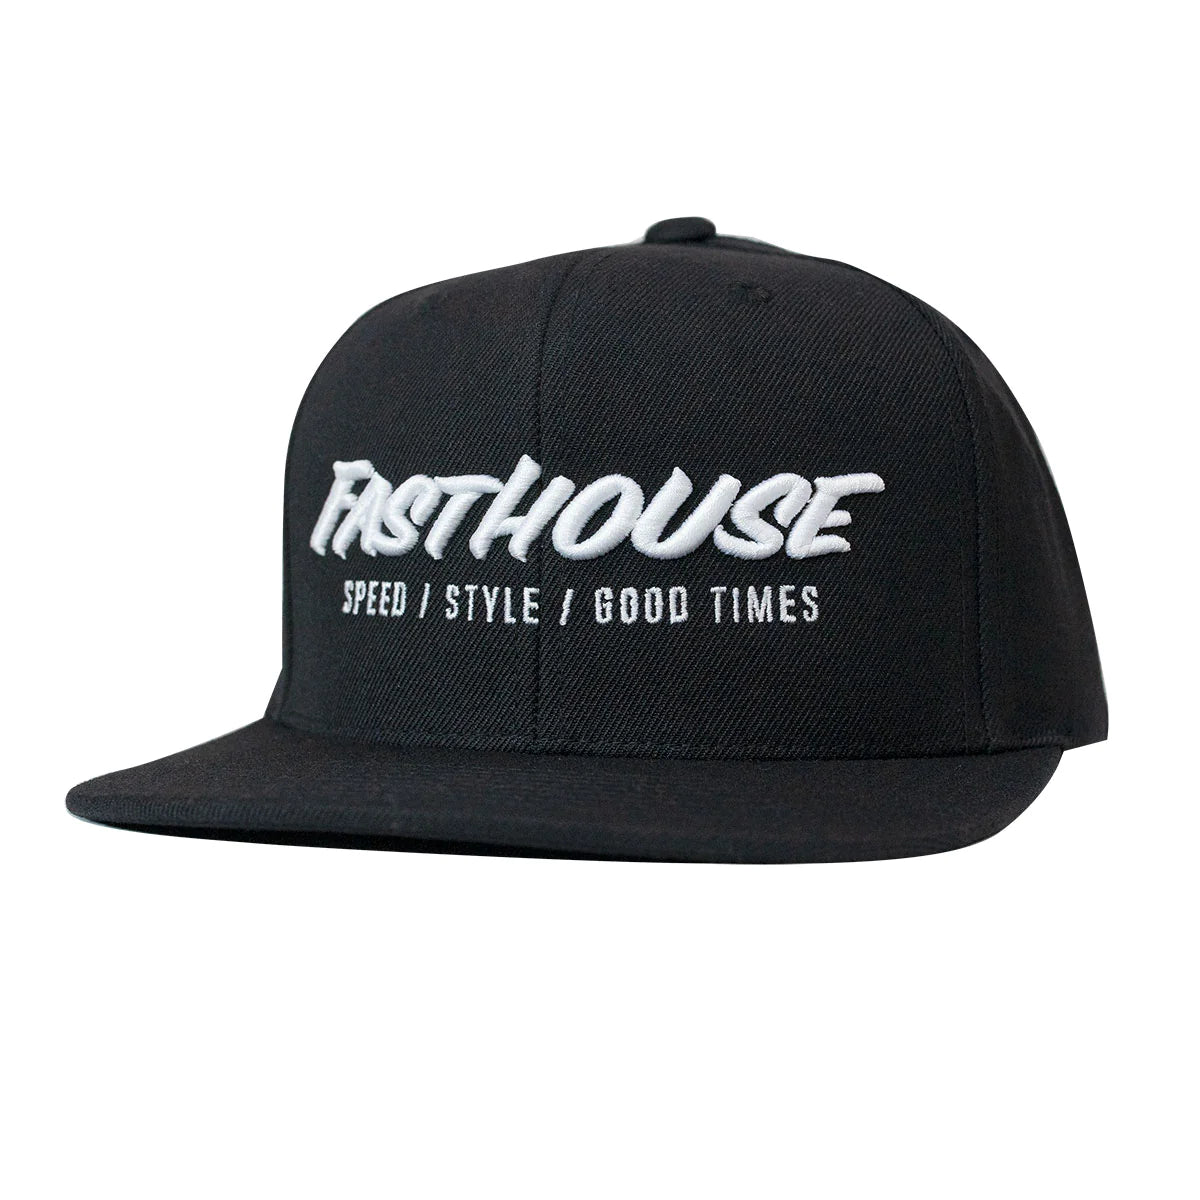 CLASSIC HAT (BLK)- OS